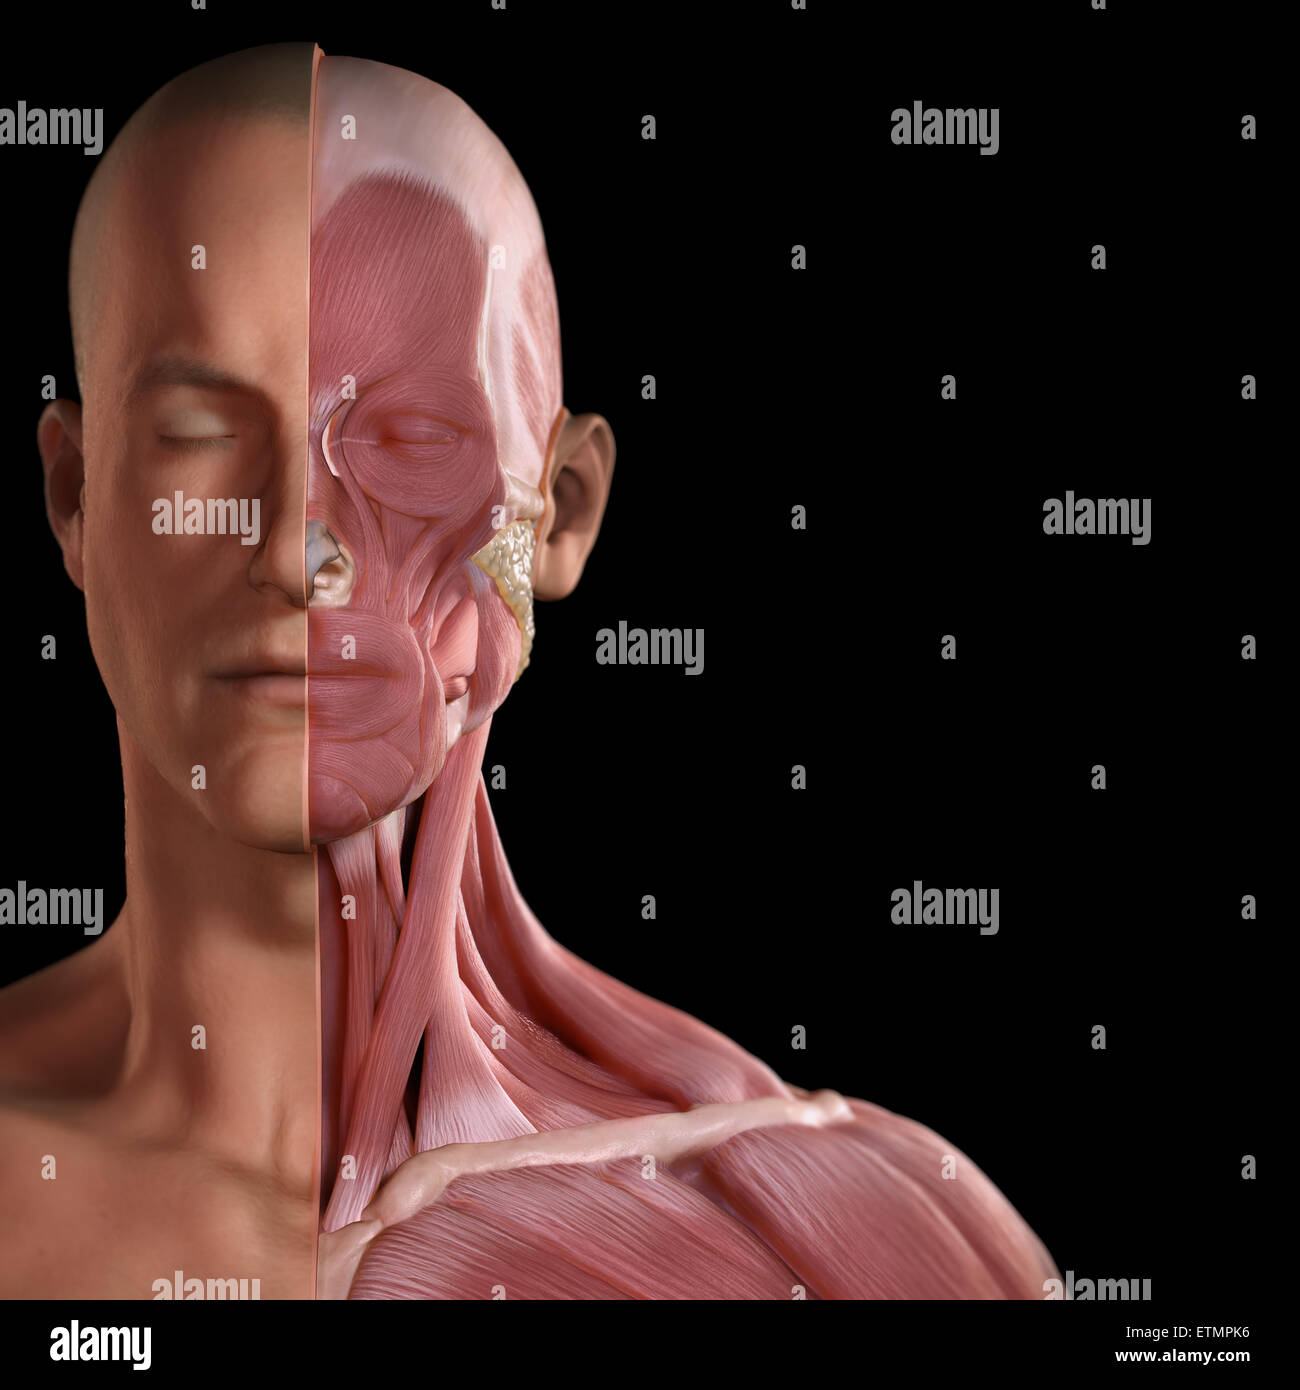 Conceptual image of the face with muscles exposed on one side. Stock Photo